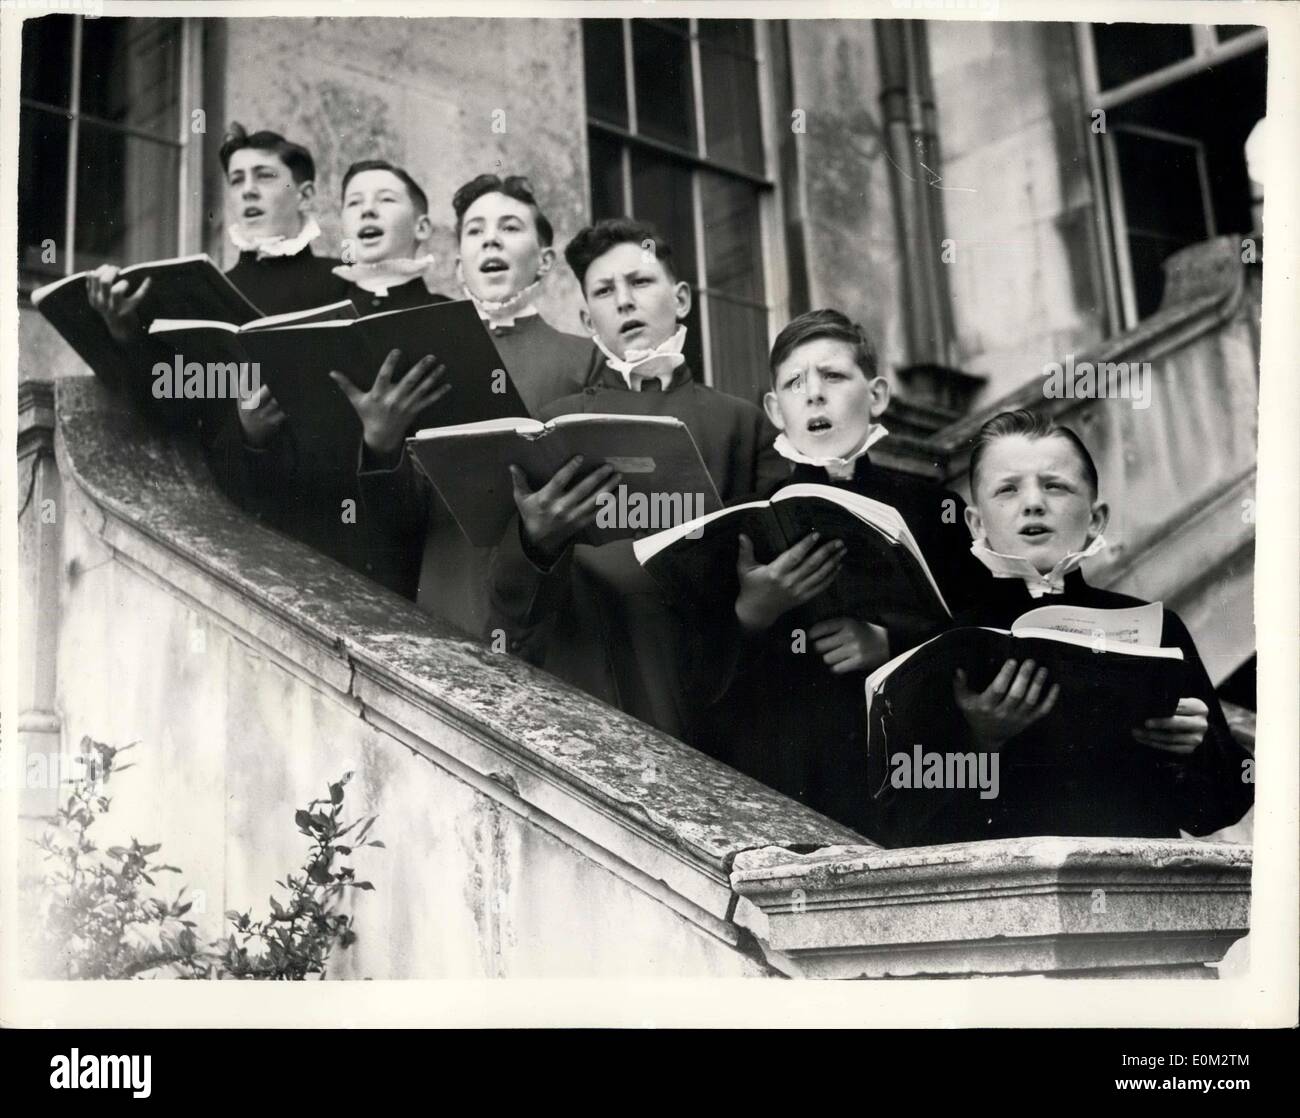 May 14, 1953 - Choirboys Rehearse For Coronation. Thirty-two boys are rehearsing the music for the coronation, at Addington Palace, Croydon. Twenty of the boys have been chosen for the Royal School of Music from amongst its 3,000 member choirs from all over the country, and the other twelve are choristers from six cathedrals. This is the first coronation, it is believed, at which boys from parish church and school choirs have been chosen to sing. Keystone Photo Shows:- (L to R): Dermot McConnell, of Belfast (St. Anne's Cathedral); Water Officer, of Belfast (St Stock Photo